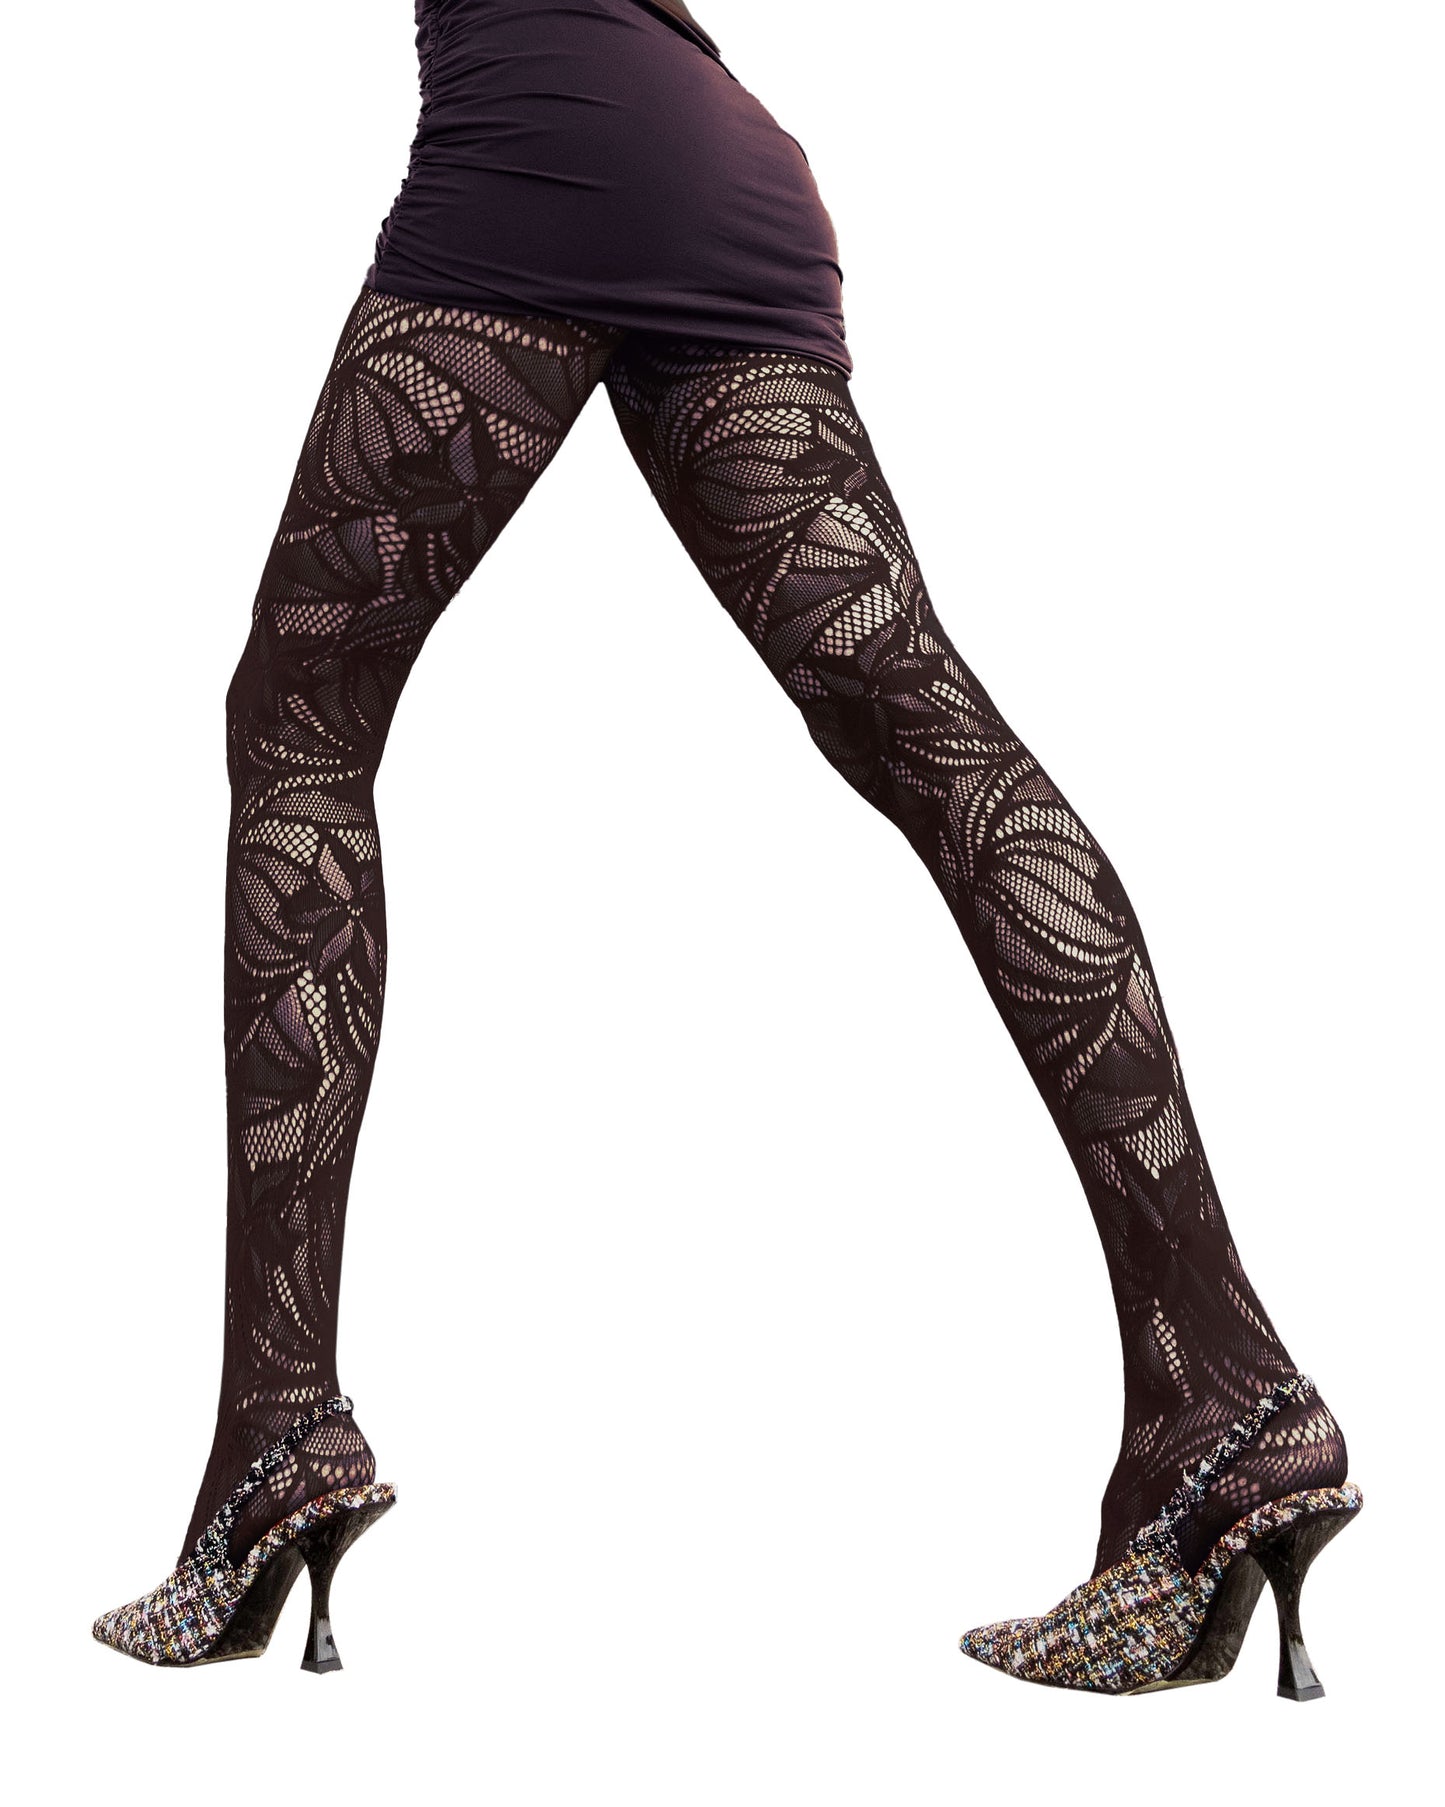 Trasparenze Il Cairo Collant - Black openwork fashion fishnet tights with a wavy floral leaf lace style pattern.